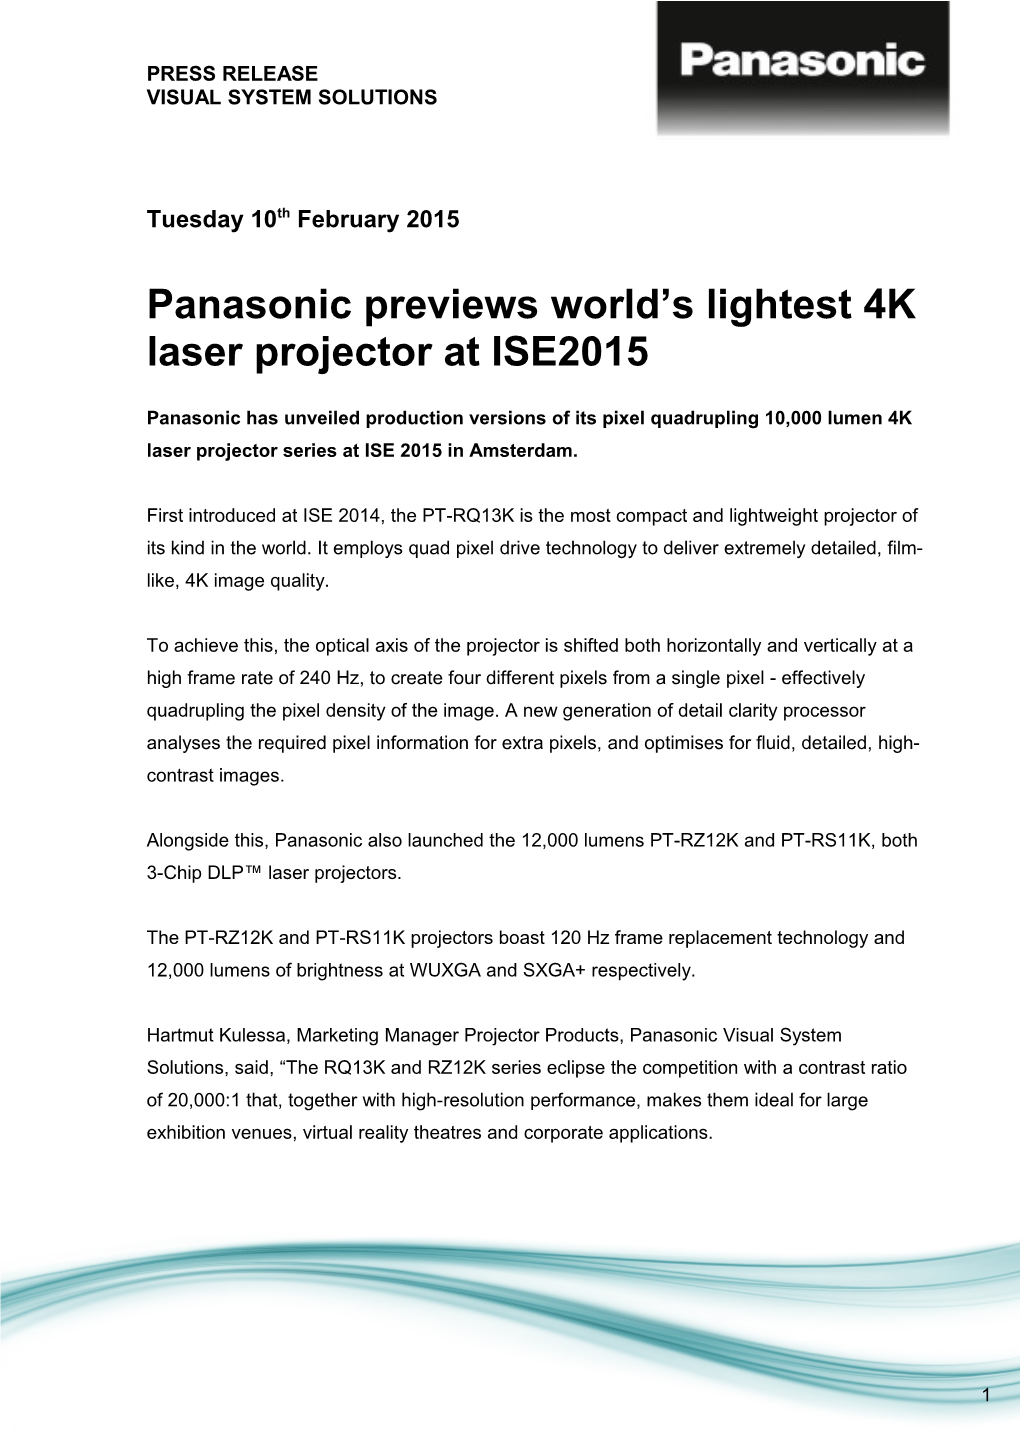 Panasonic Previews World S Lightest 4K Laser Projector at ISE2015